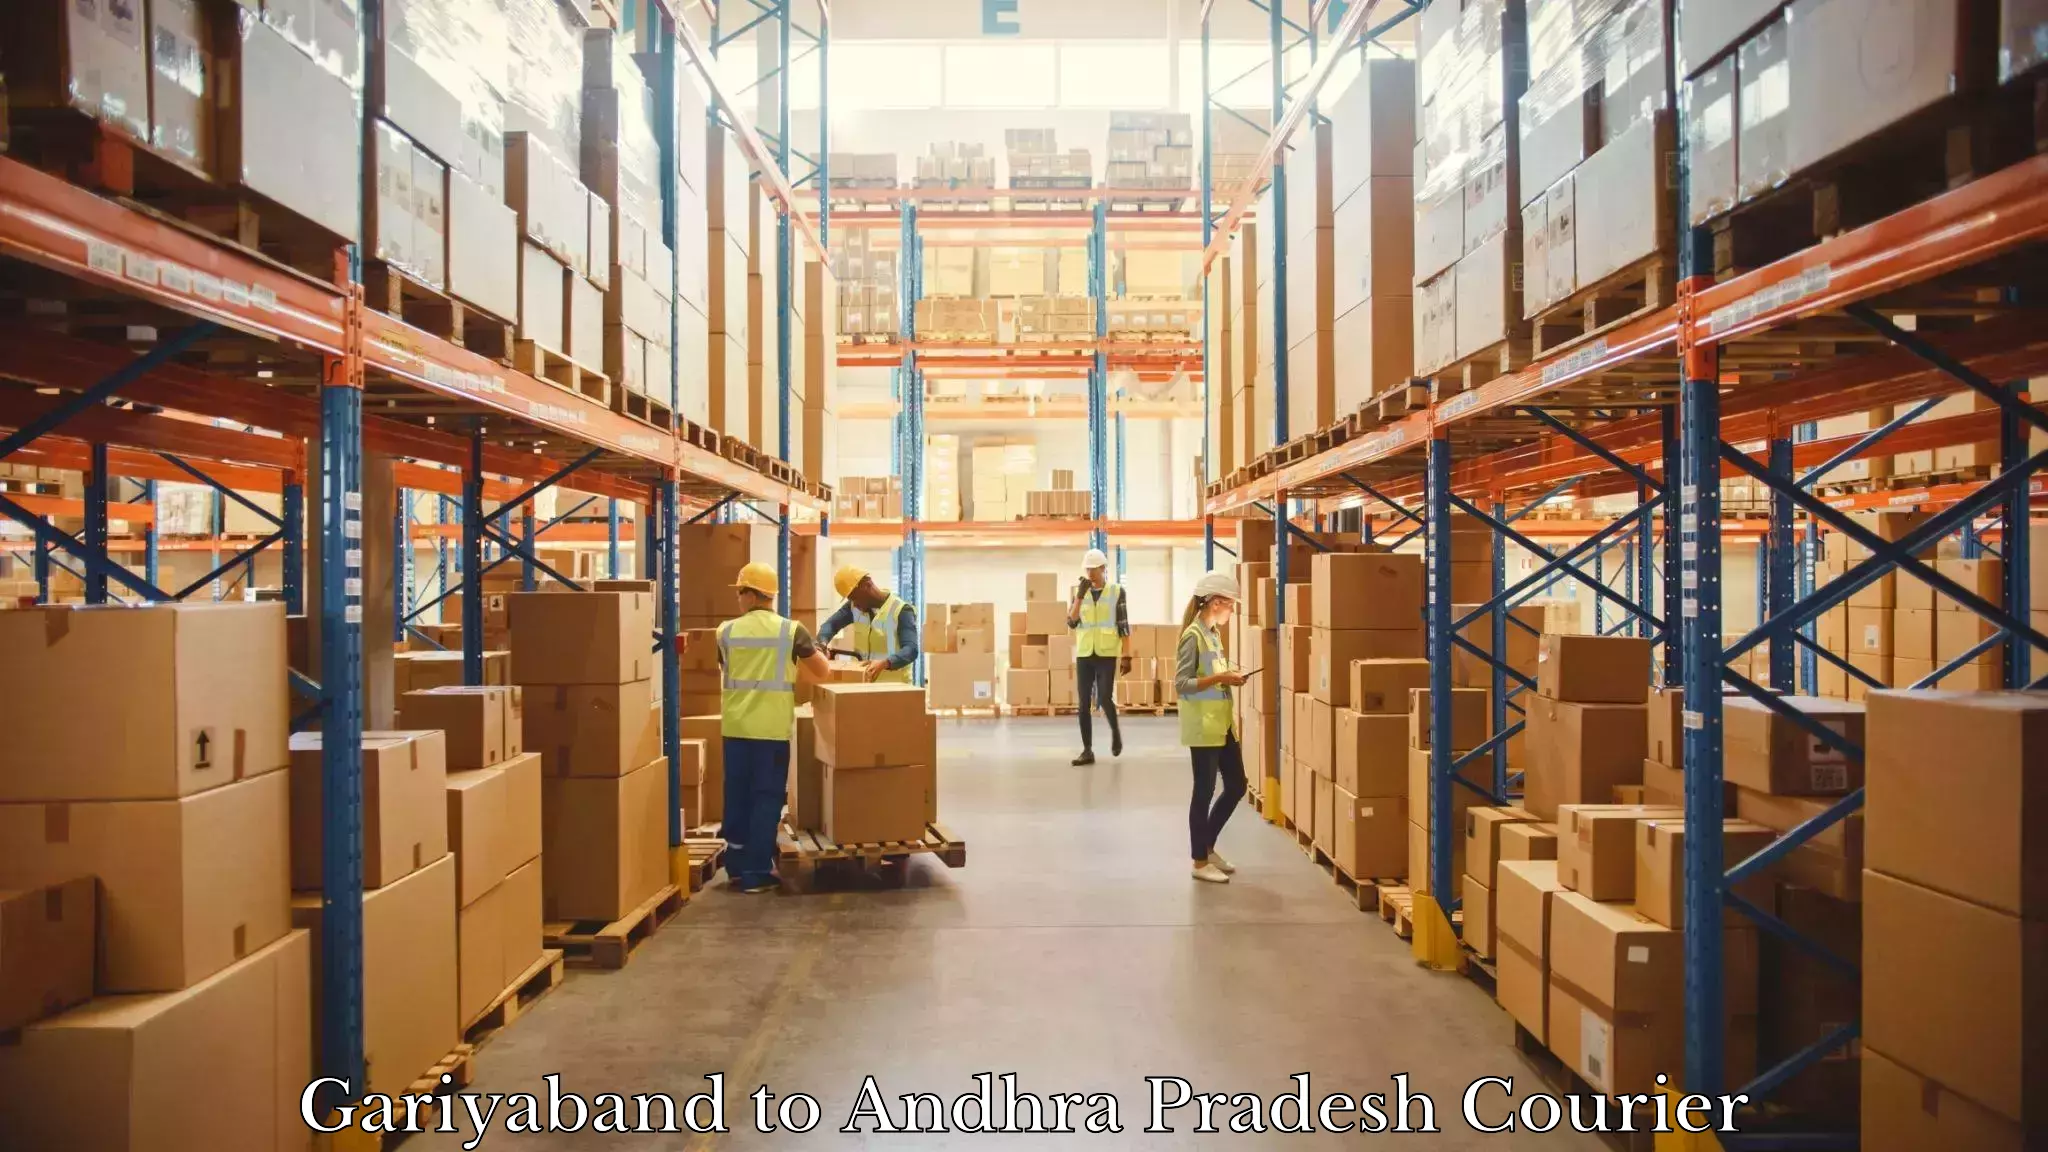 Easy access courier services in Gariyaband to Visakhapatnam Port